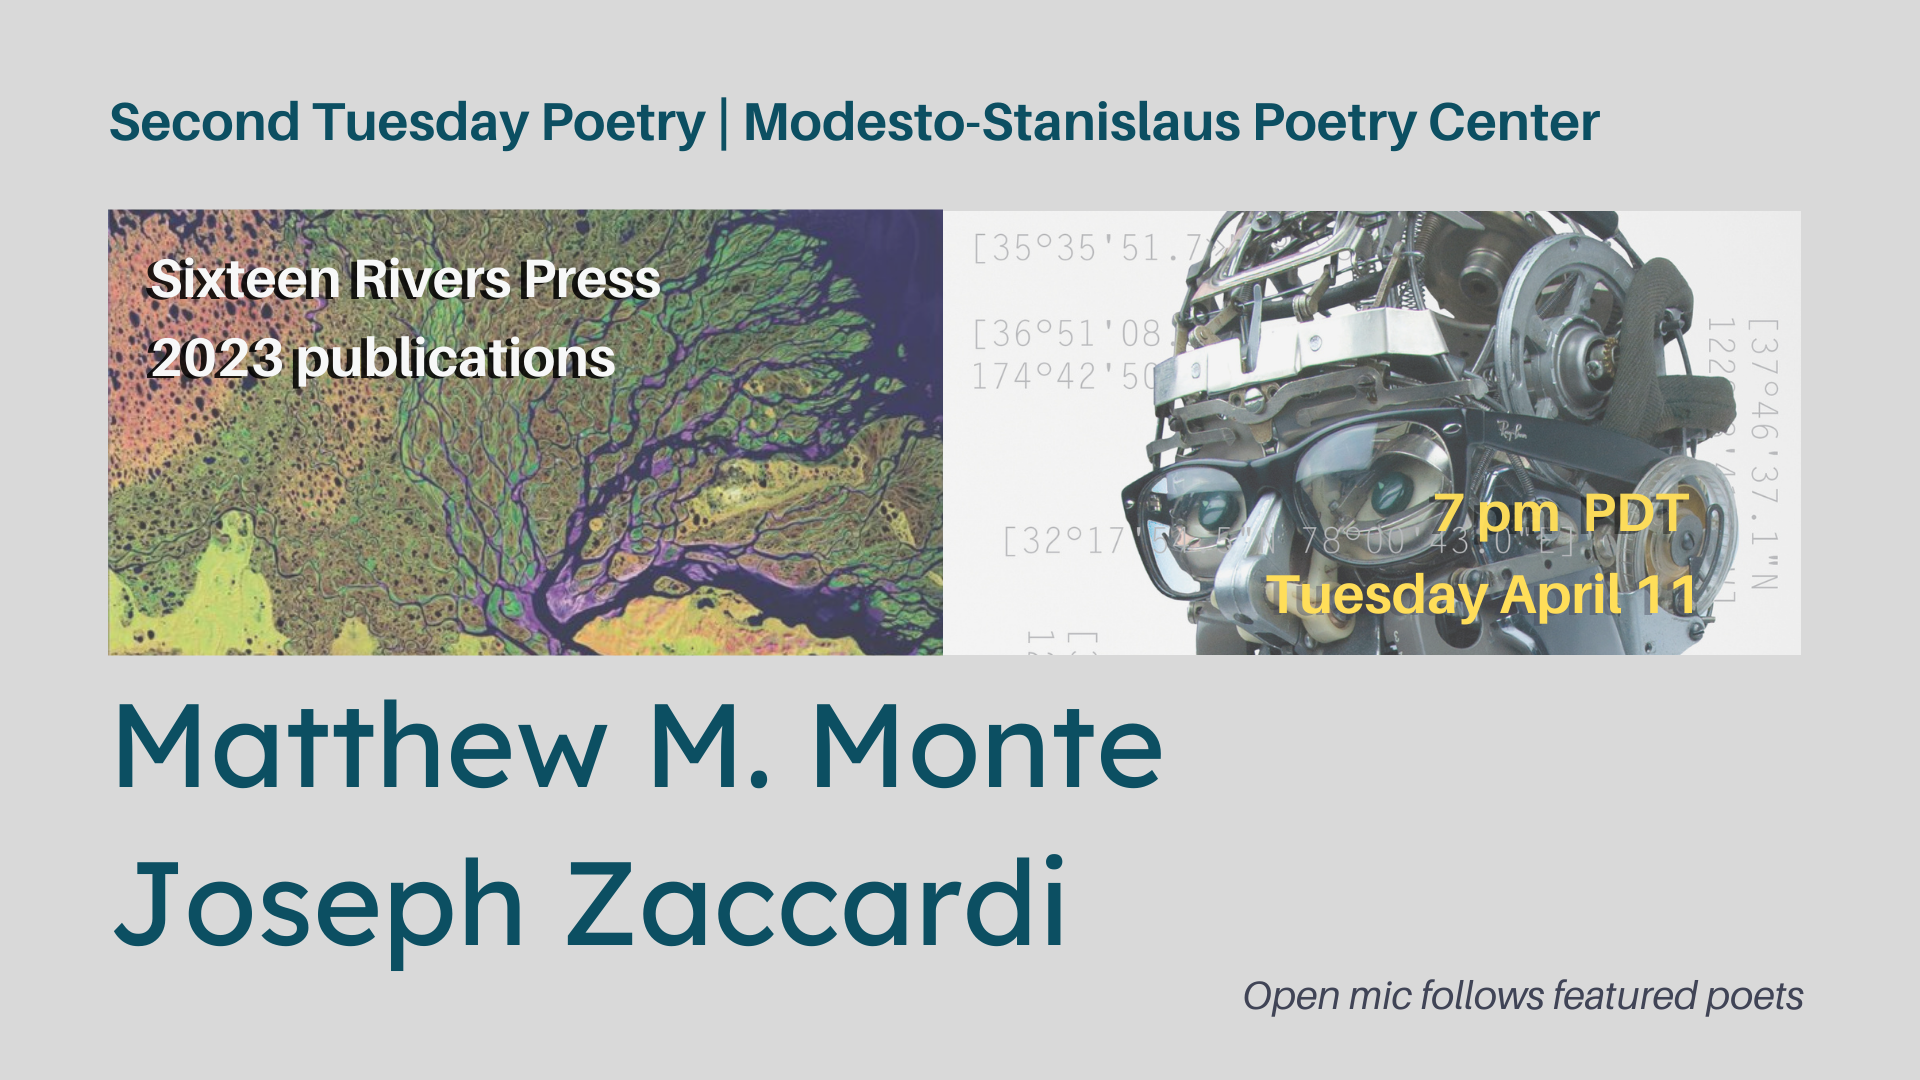 Second Tuesday Poetry by the Modesto-Stanislaus Poetry Center featuring Matthew M. Monte and Joseph Zaccardi, Tuesday April 11, 2023 at 7:00 pm PDT.